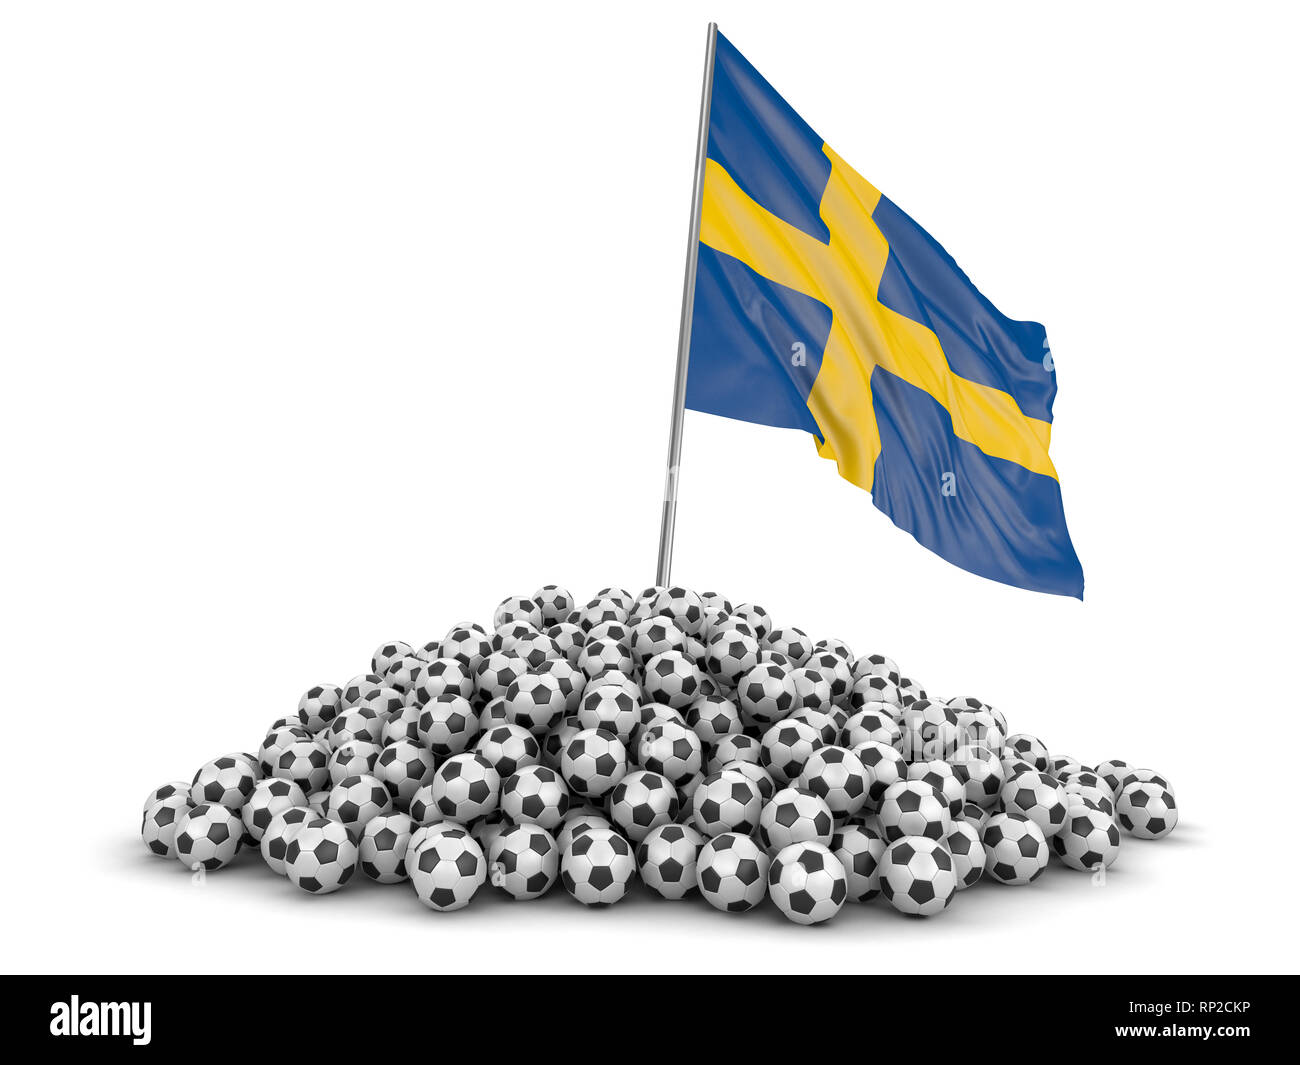 Pile of Soccer footballs and flag. Image with clipping path Stock Photo